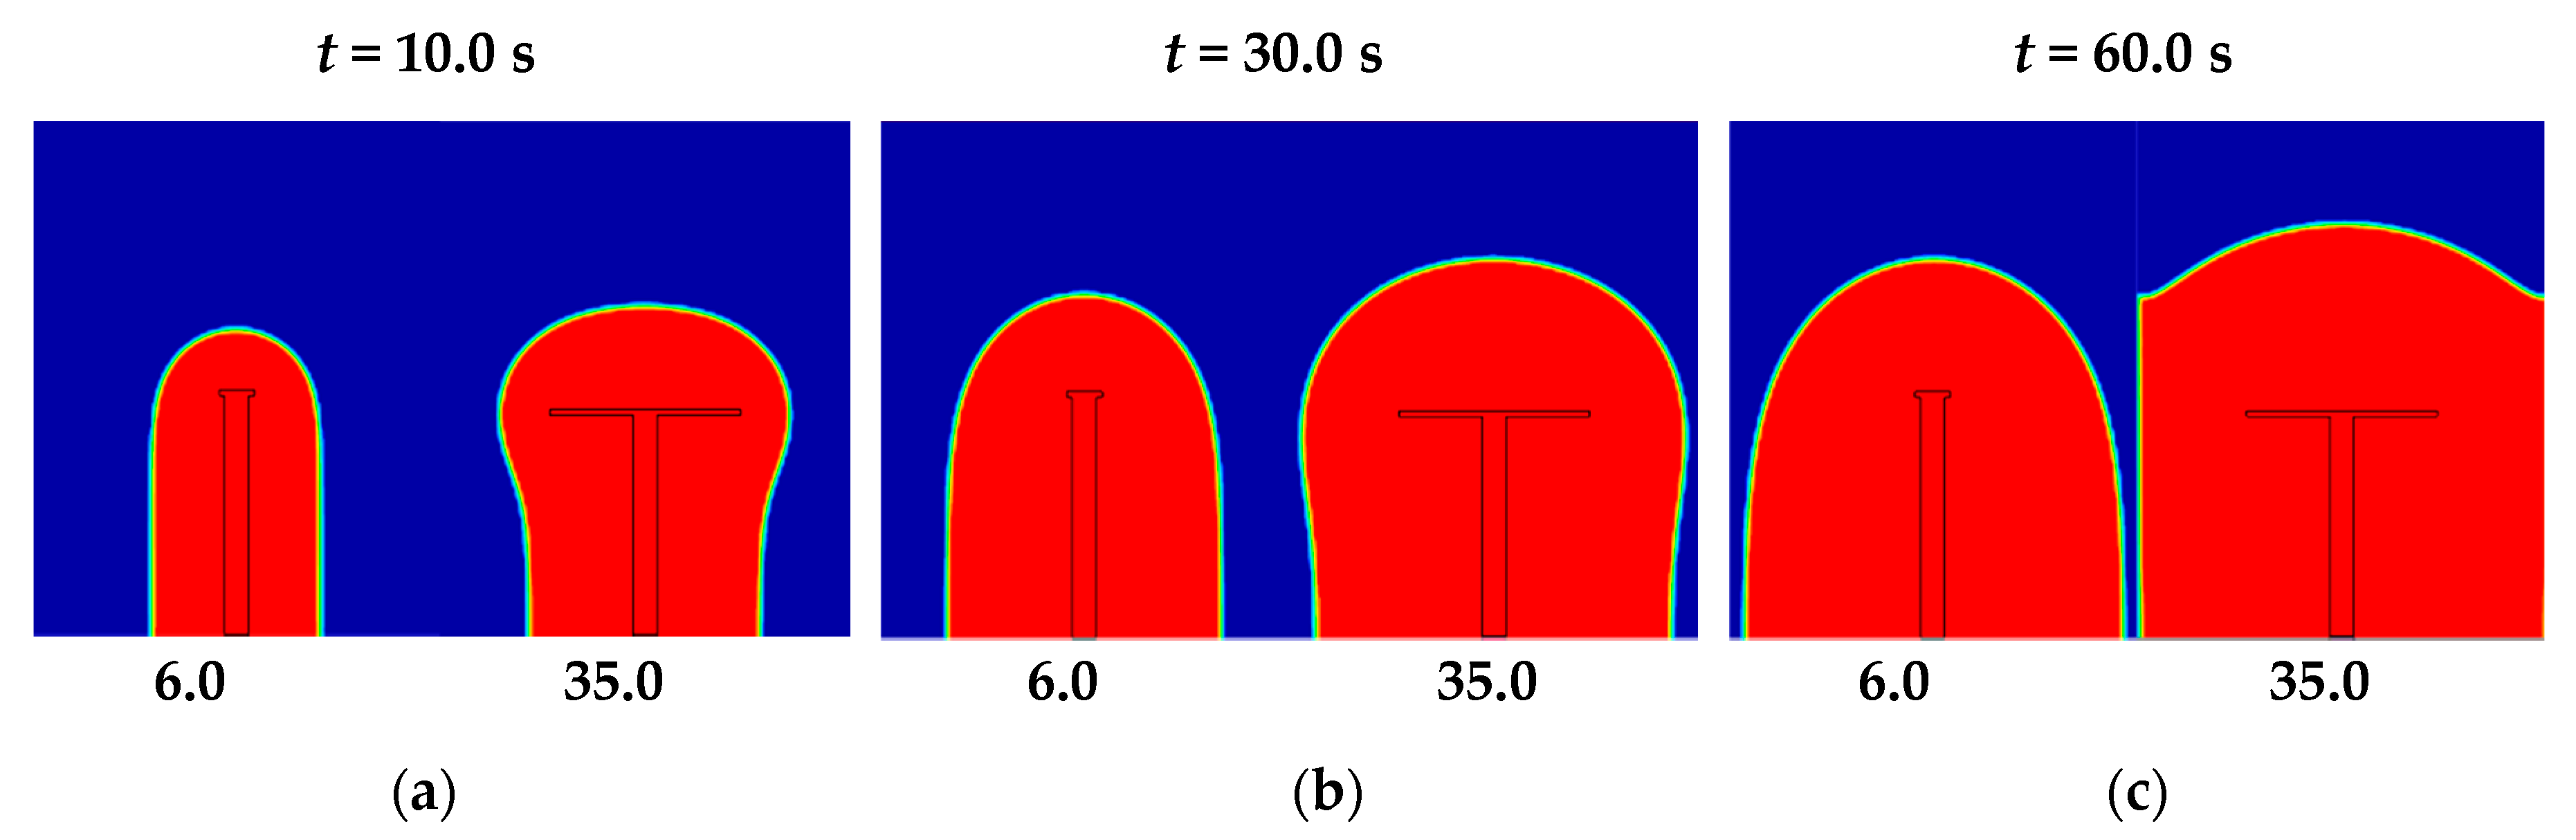 Applied Sciences Free Full Text Numerical Analysis Of The Influence Of Empty Channels Design On Performance Of Resin Flow In A Porous Plate Html